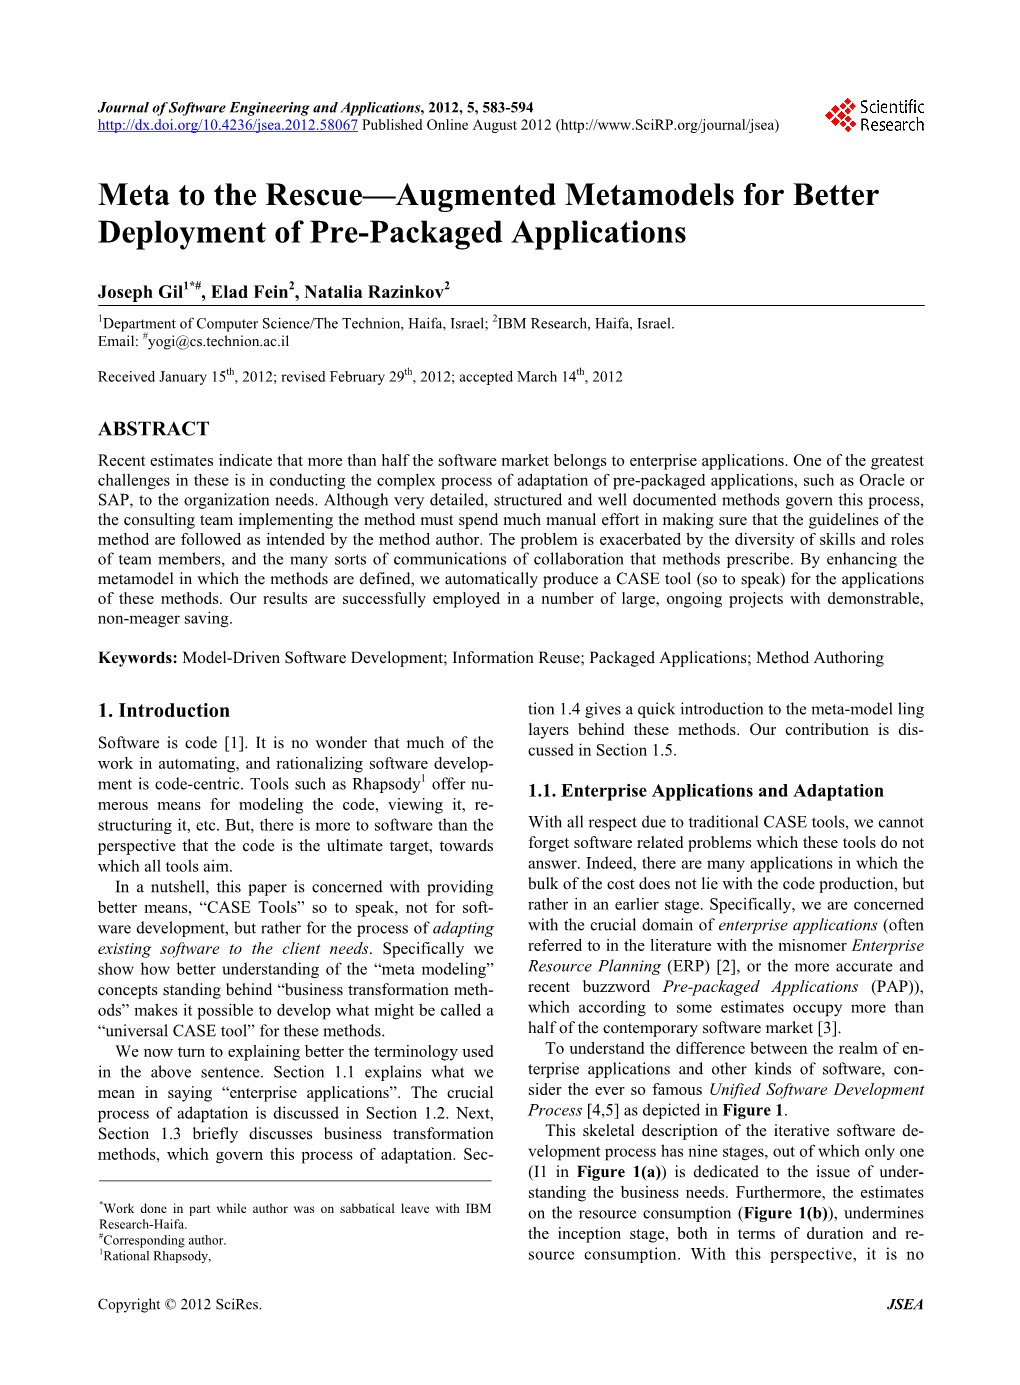 Meta to the Rescue—Augmented Metamodels for Better Deployment of Pre-Packaged Applications